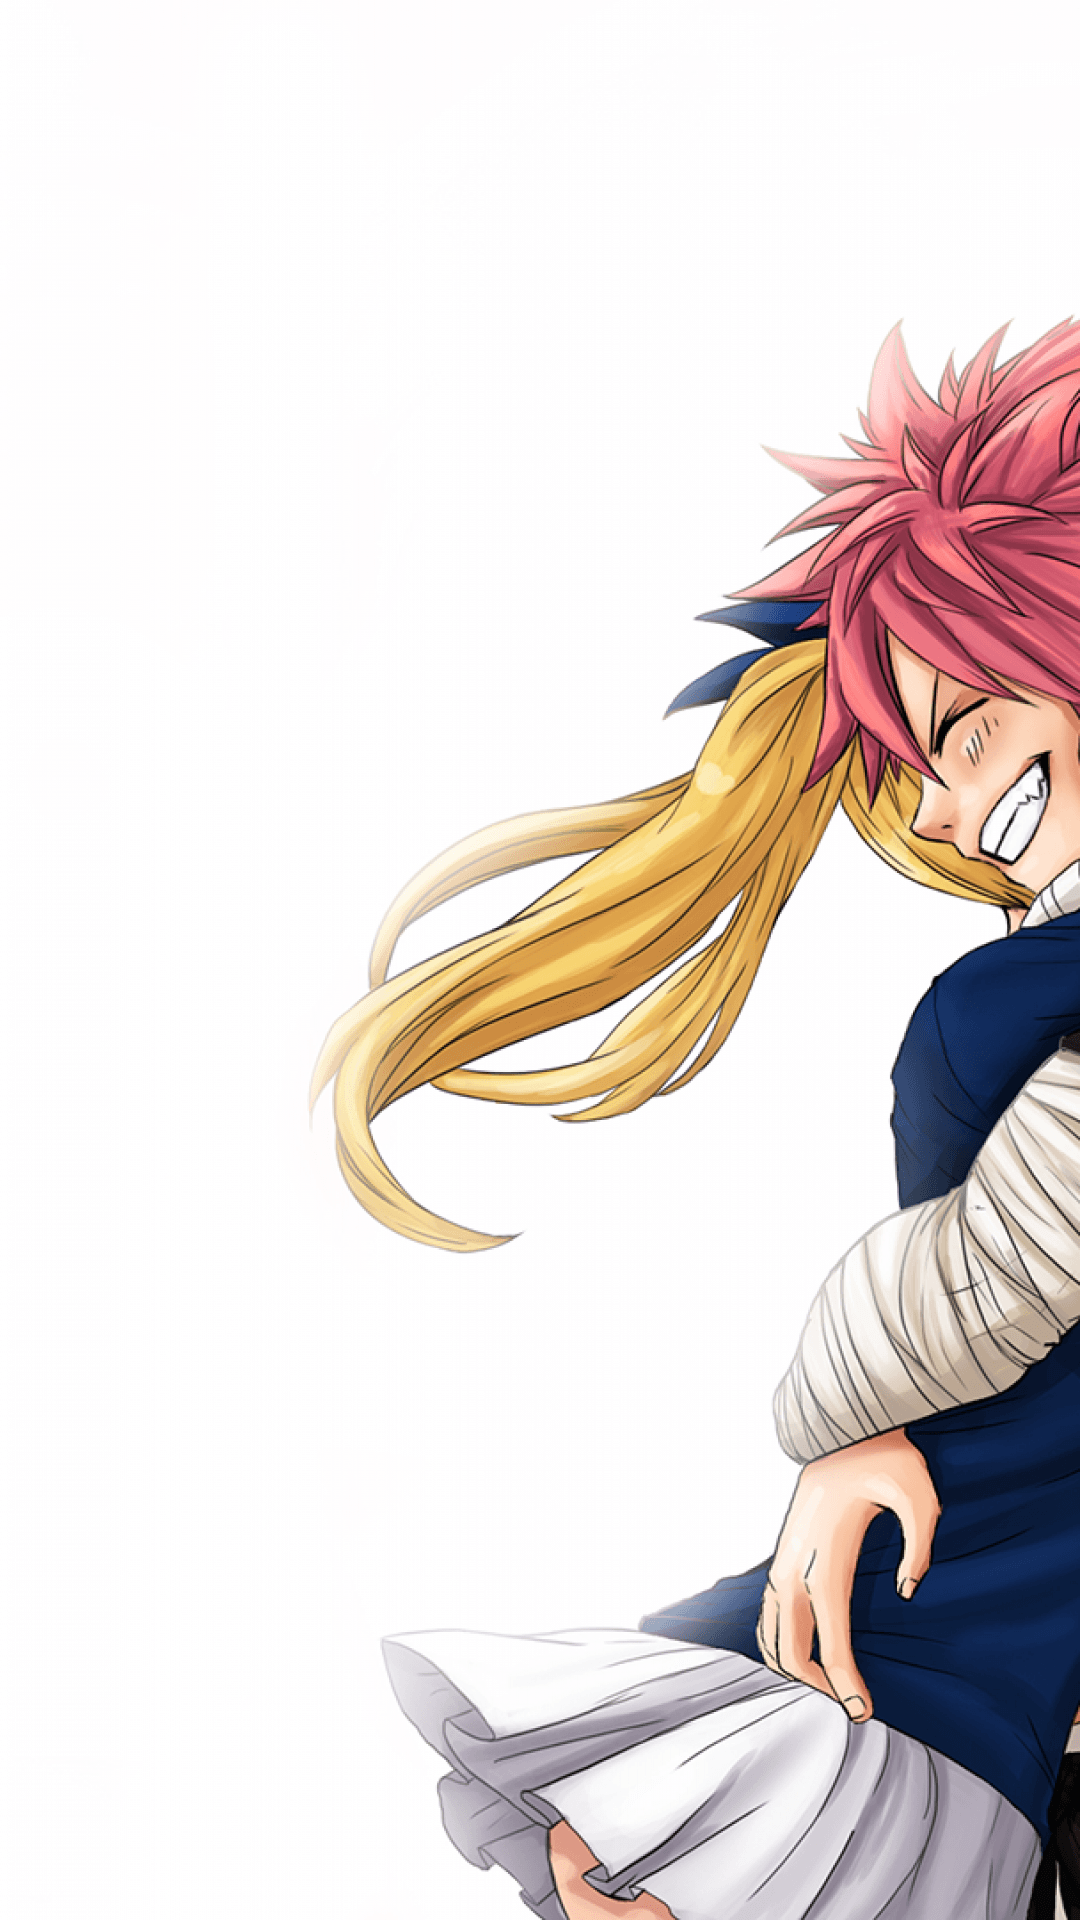 Media Lucy took pushup bras a little too far  rfairytail